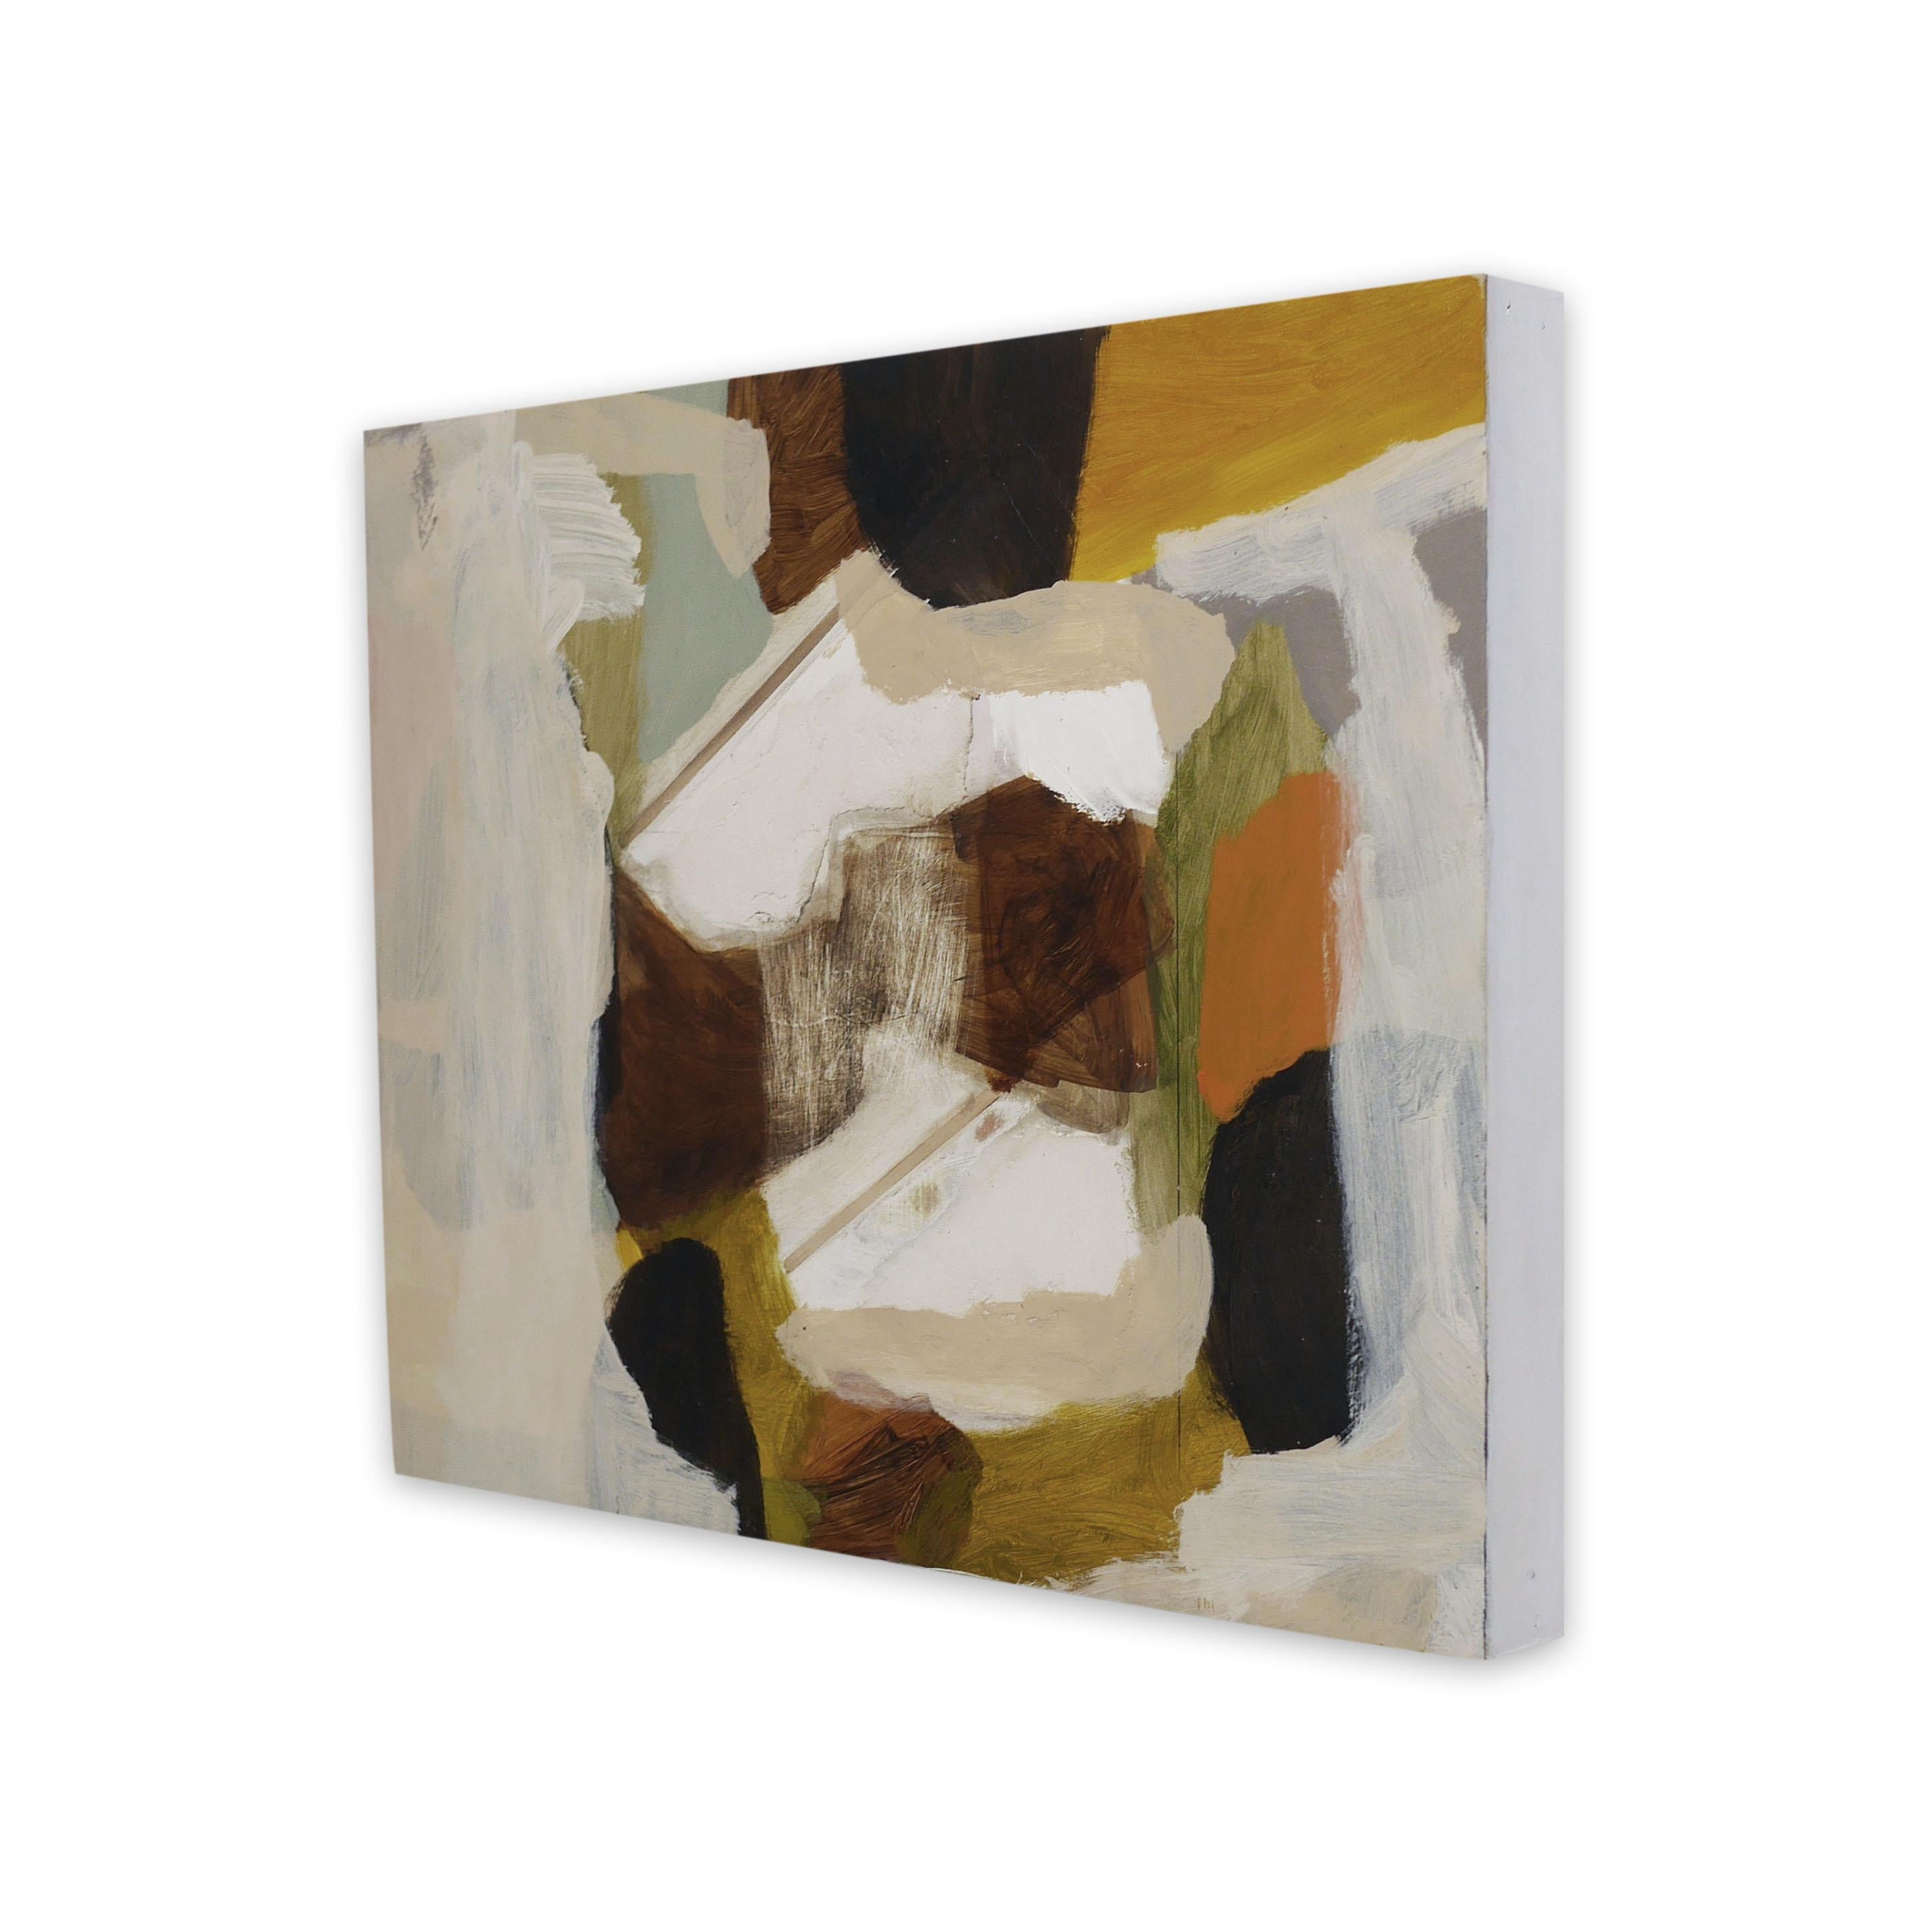 Erased Painting (Abstract painting) - Brown Abstract Painting by Michael Cusack